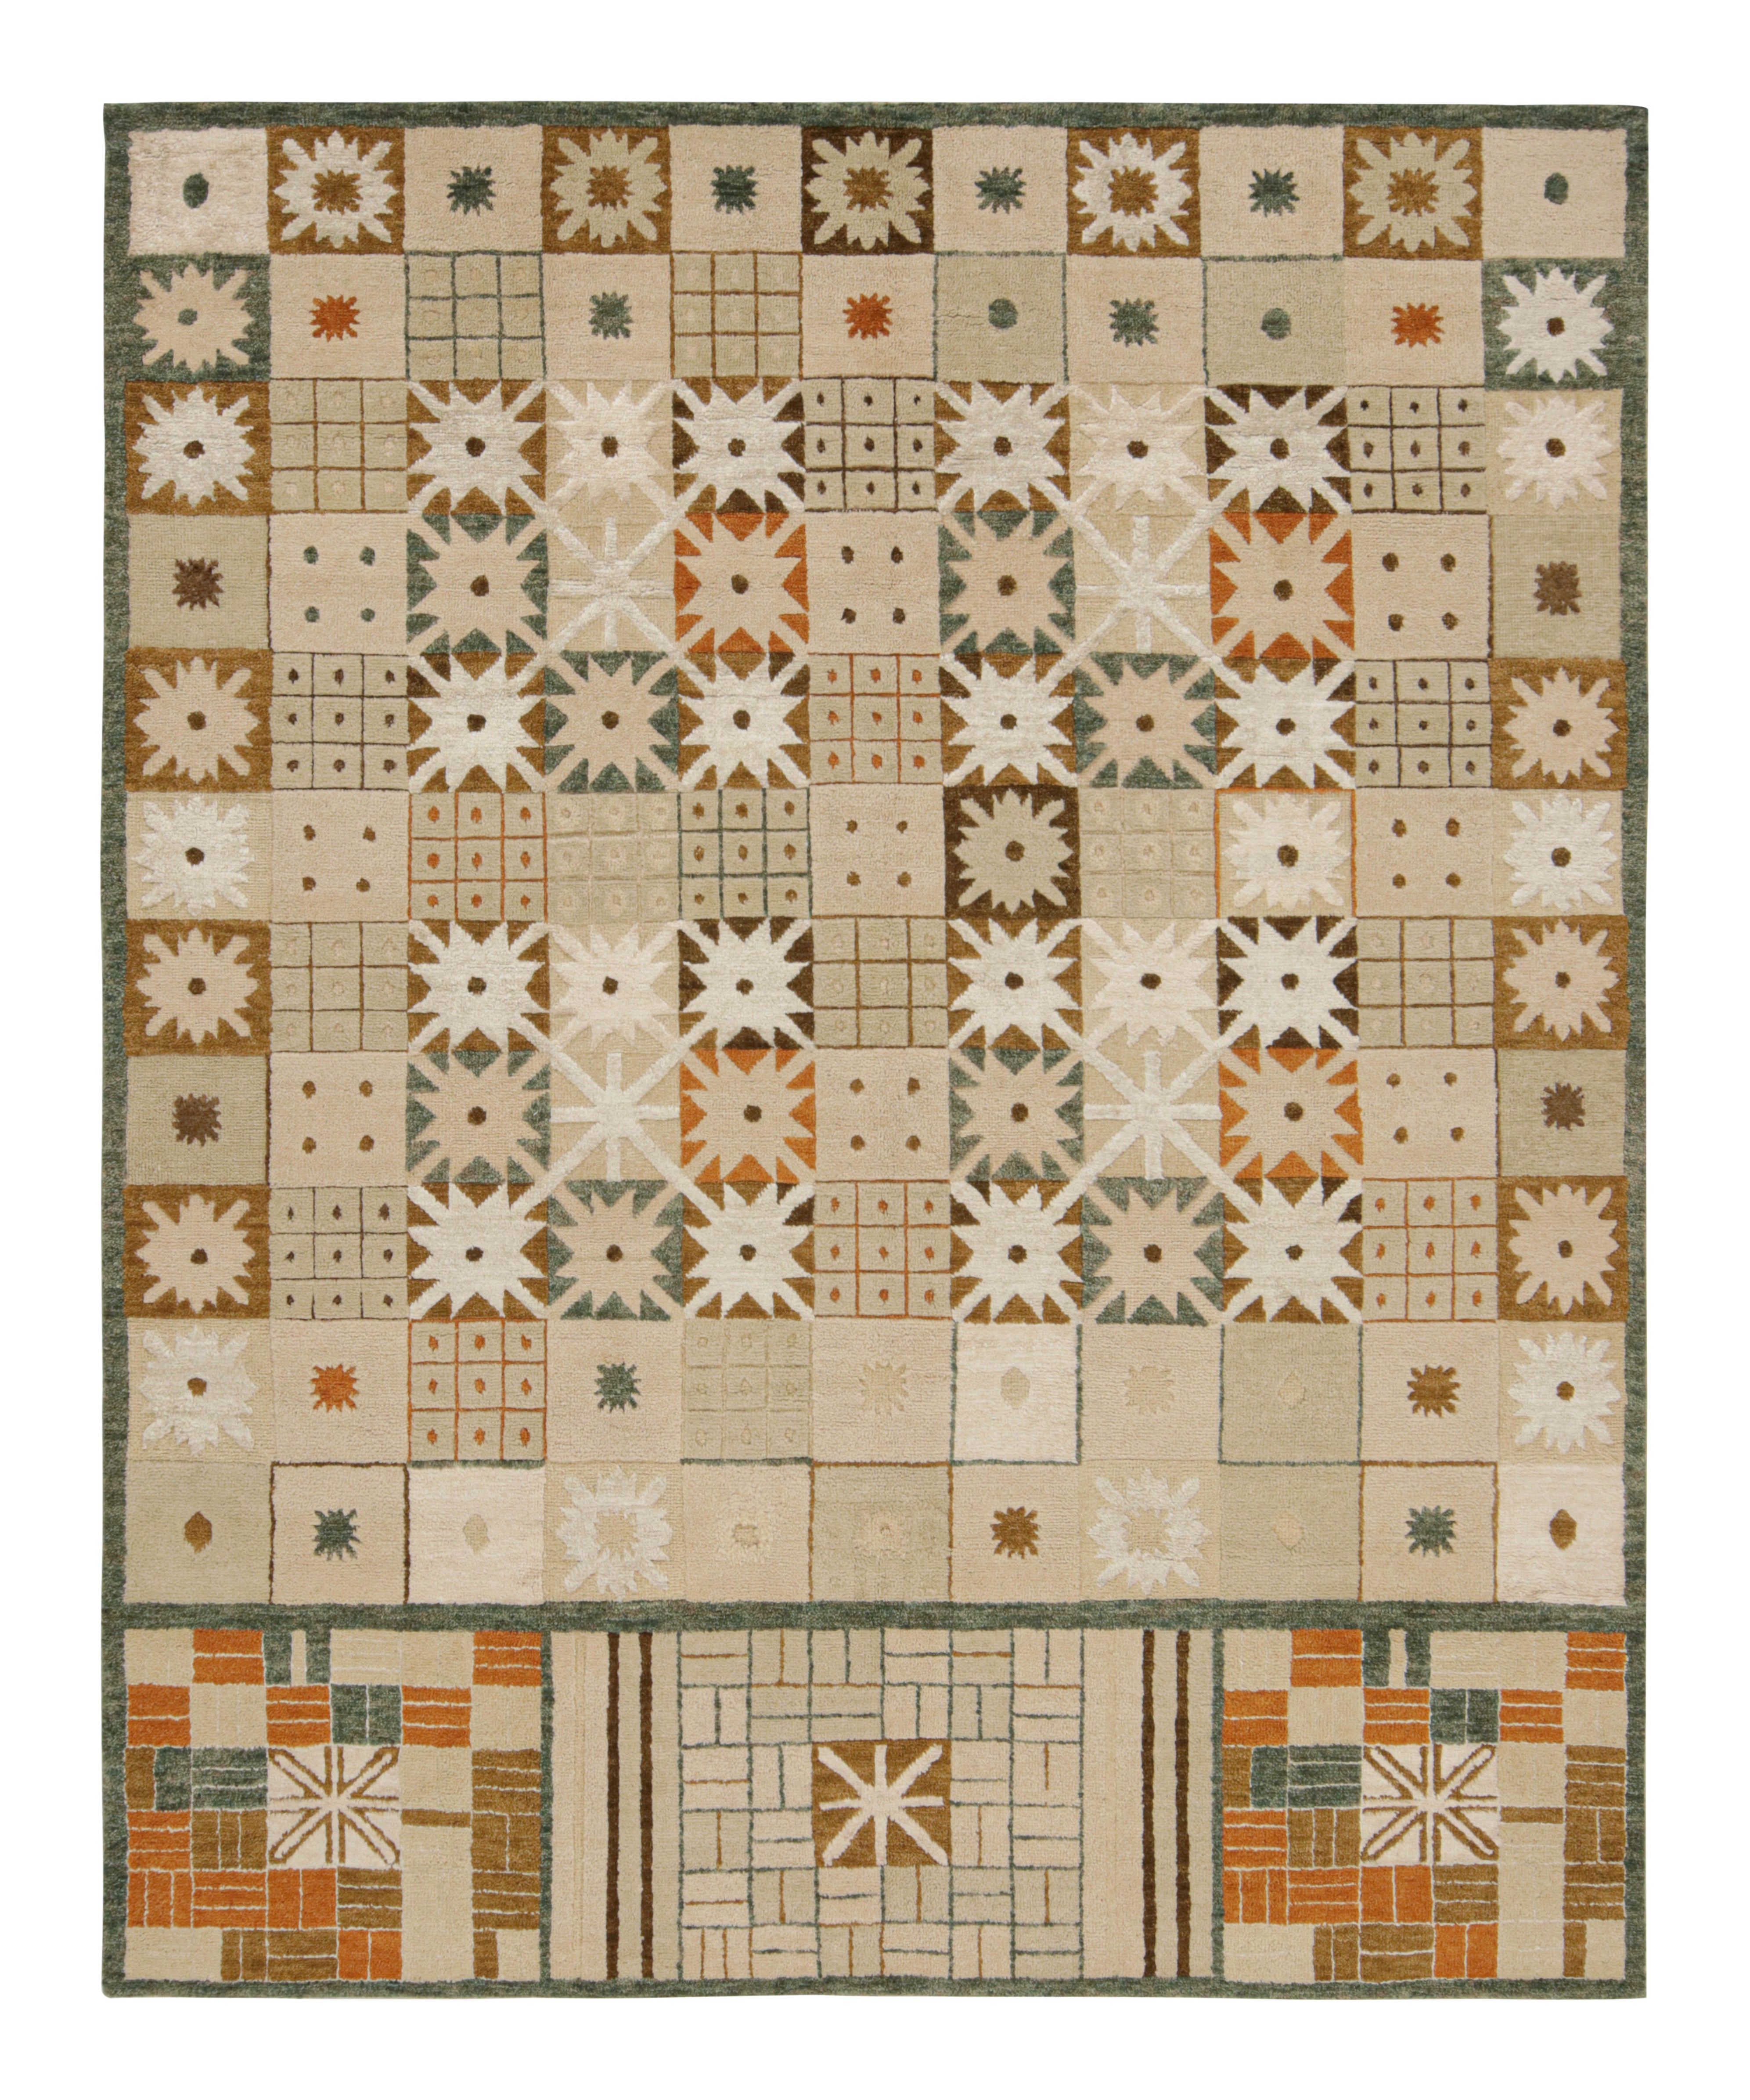 Rug & Kilim’s Scandinavian Style Rug in Beige-Brown with Geometric Patterns For Sale